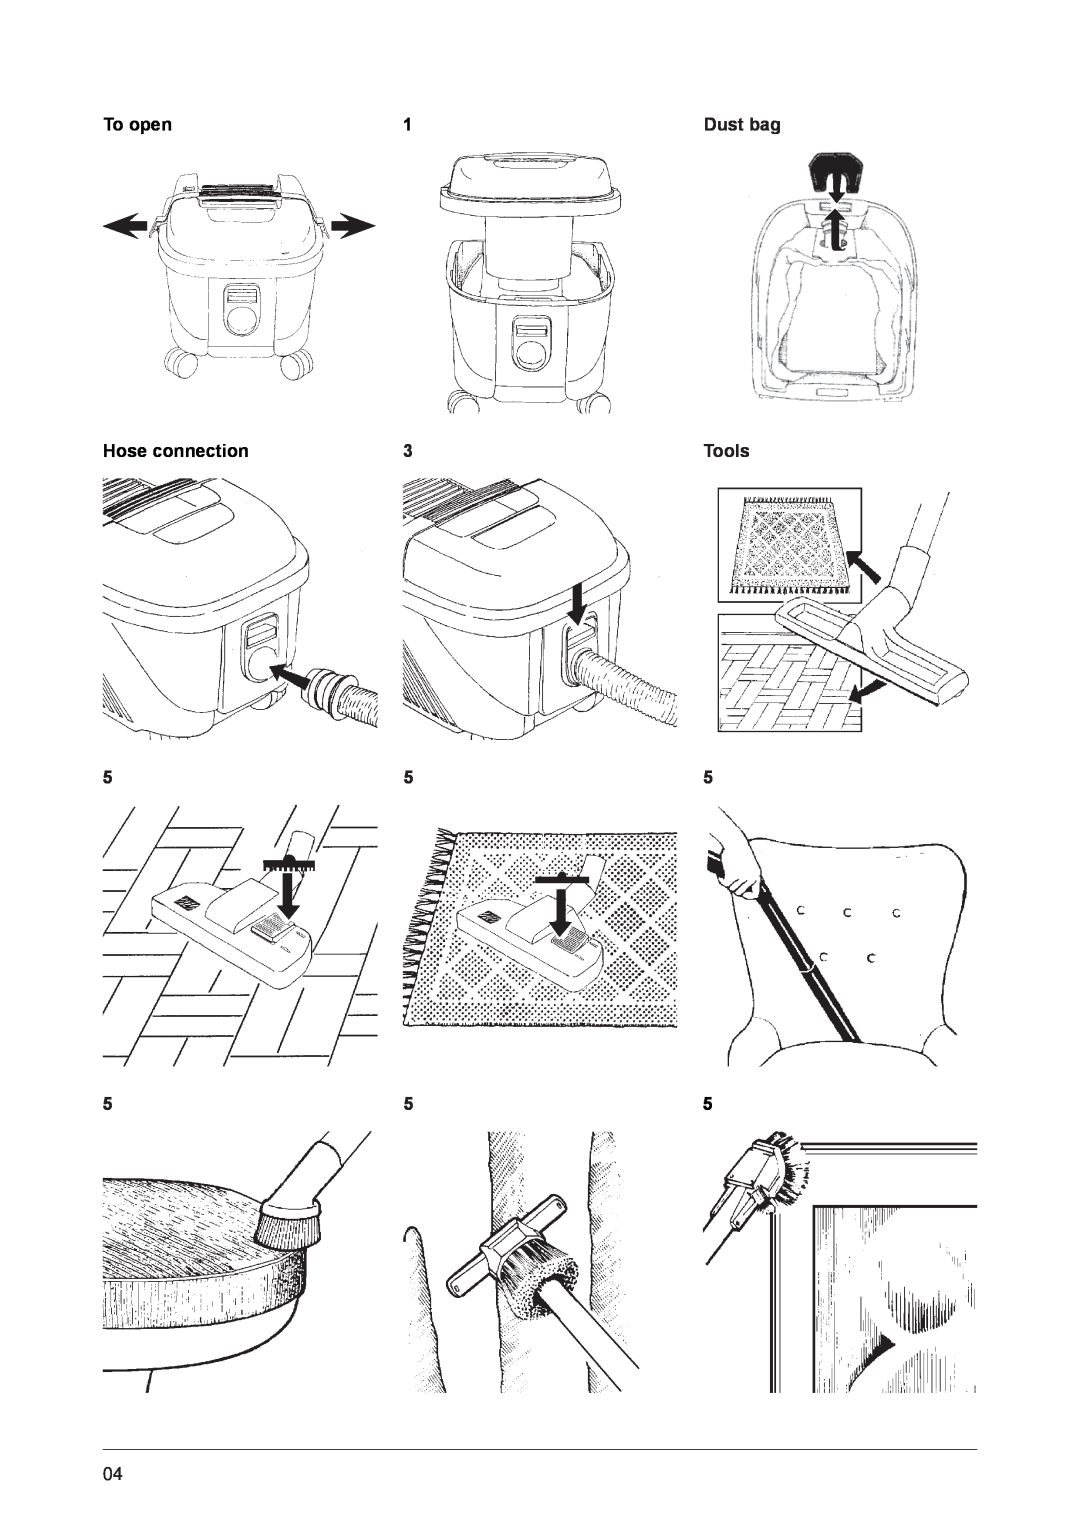 Nilfisk-ALTO UZ 934 operating instructions Dust bag, Tools, To open, Hose connection 